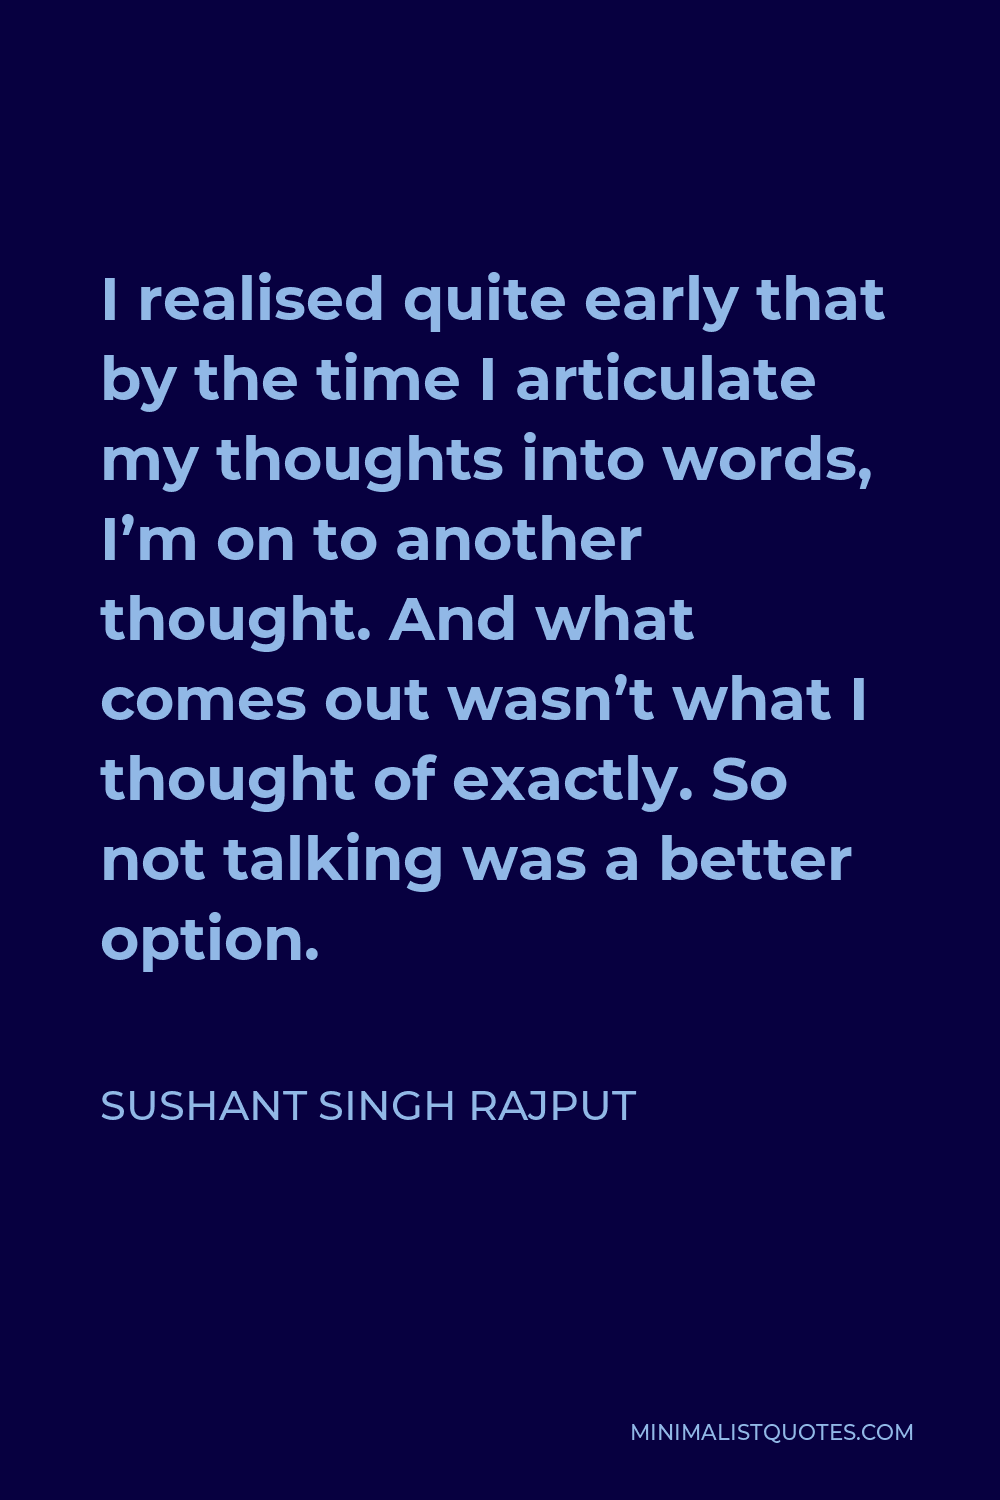 Sushant Singh Rajput Quote - I realised quite early that by the time I articulate my thoughts into words, I’m on to another thought. And what comes out wasn’t what I thought of exactly. So not talking was a better option.